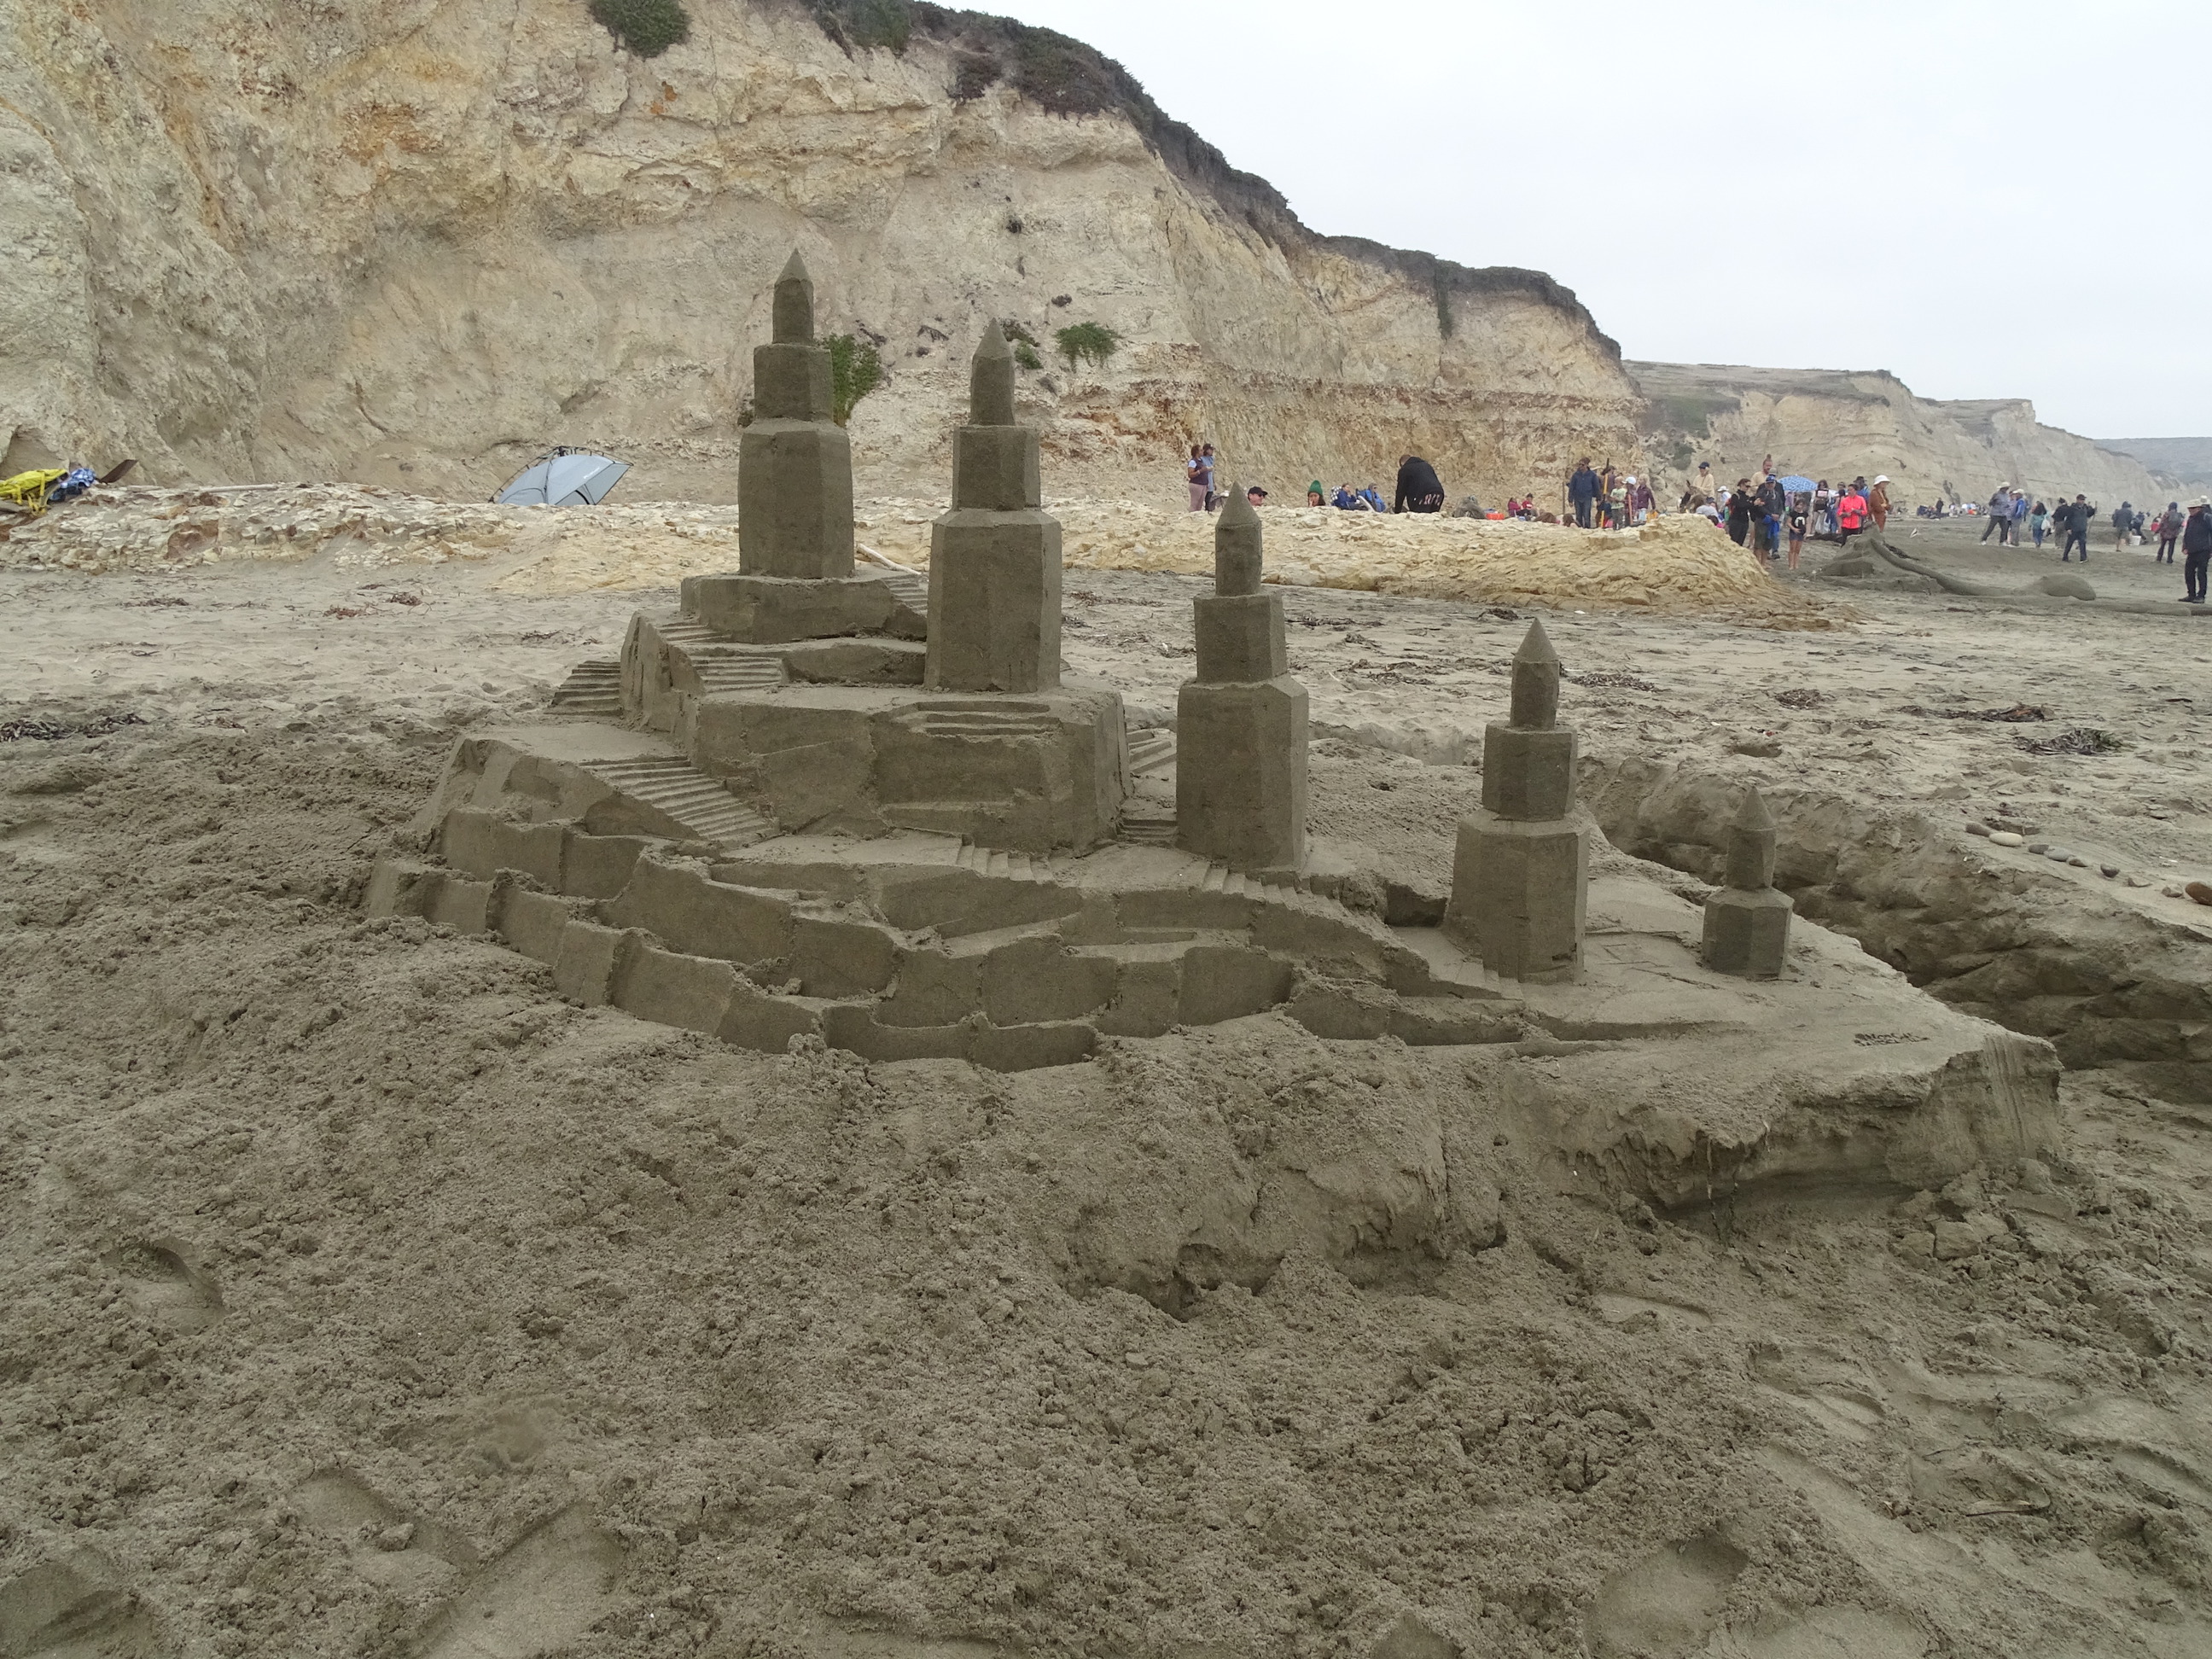 A large sand sculpture of a castle with five octagonally shaped towers and lots of staircases.